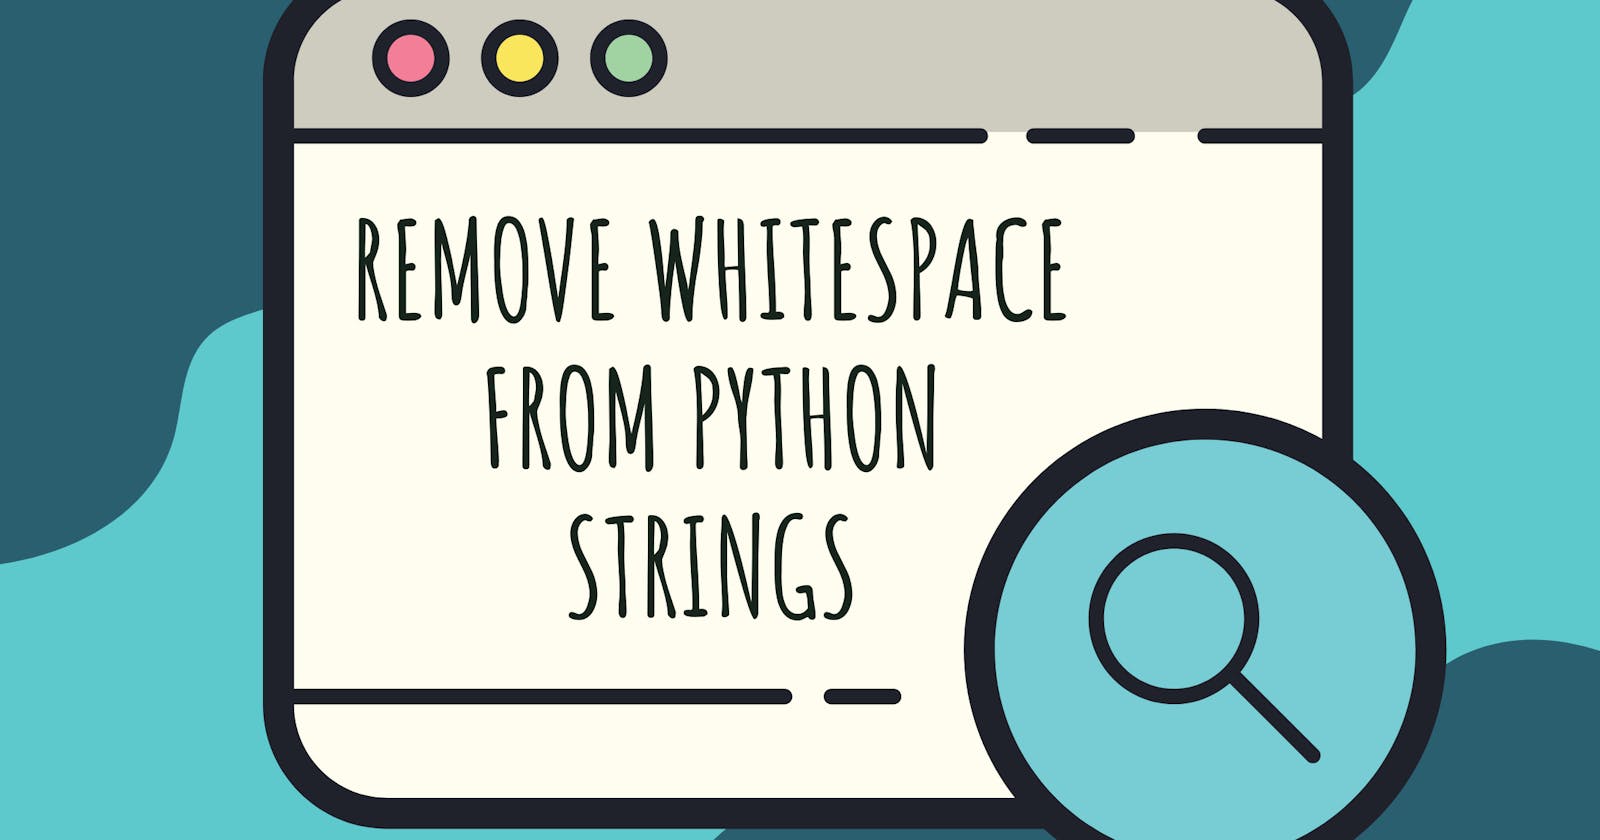 Python String Methods for Whitespace Removal